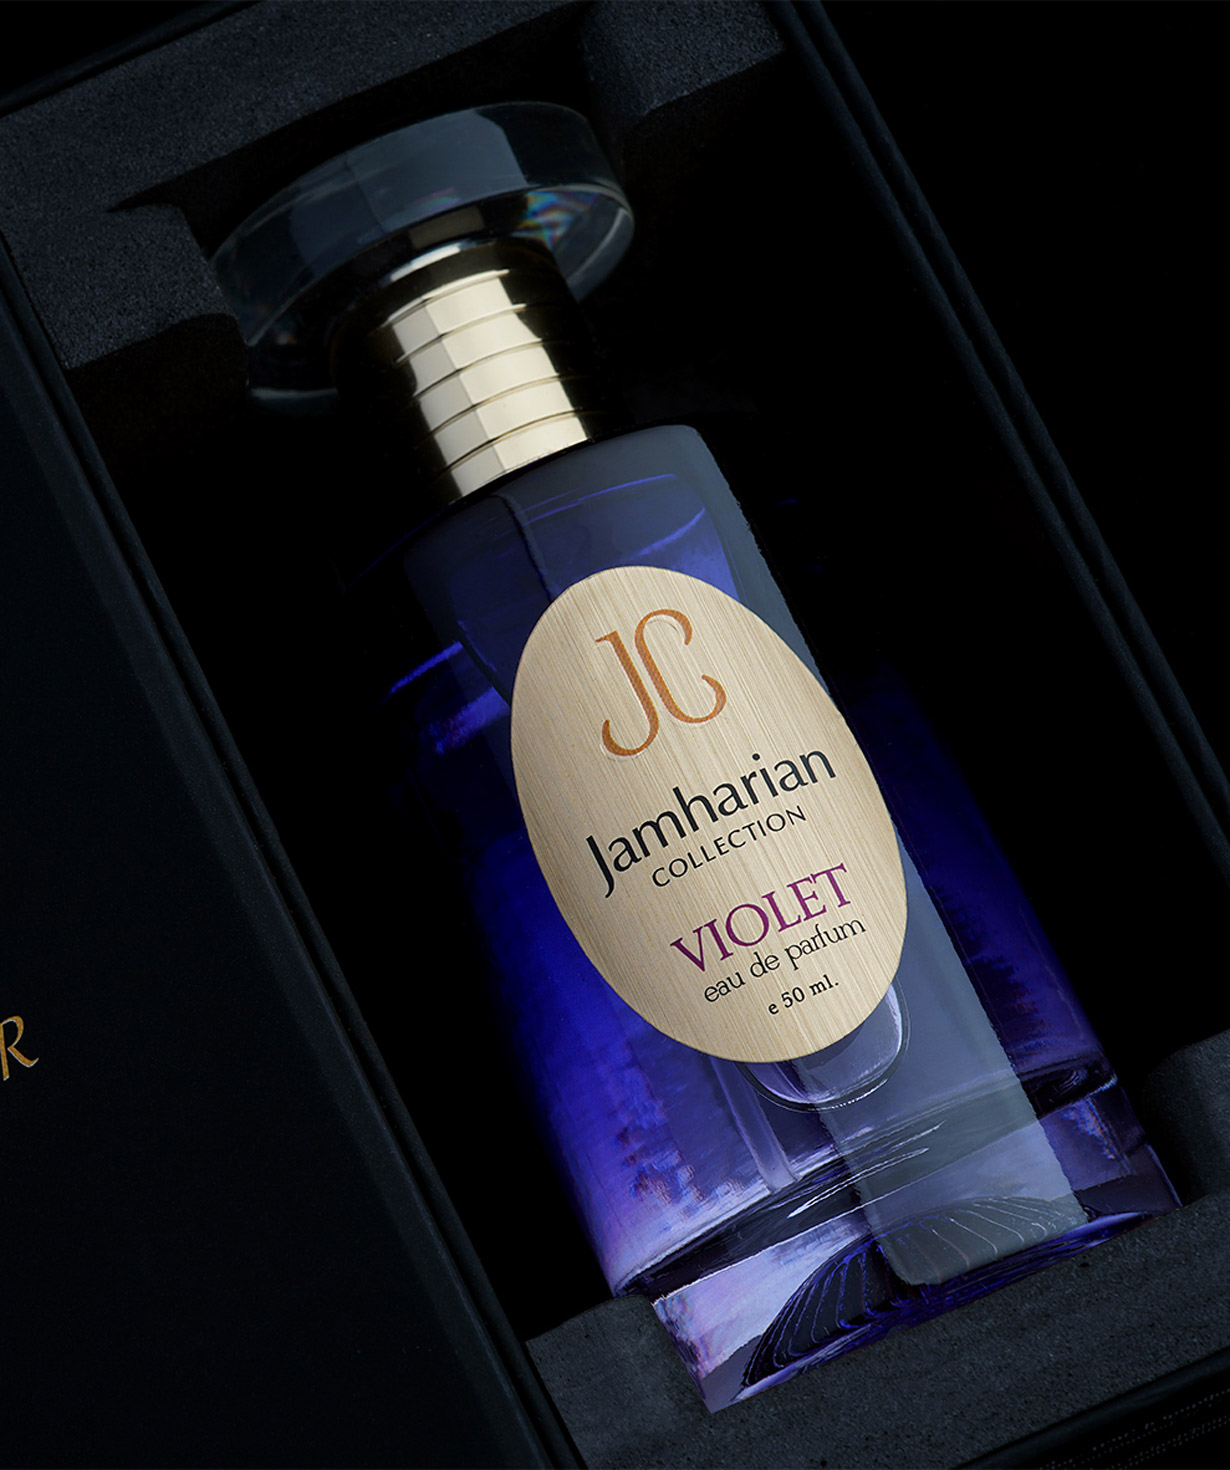 Perfume `Jamharian Collection Violet`